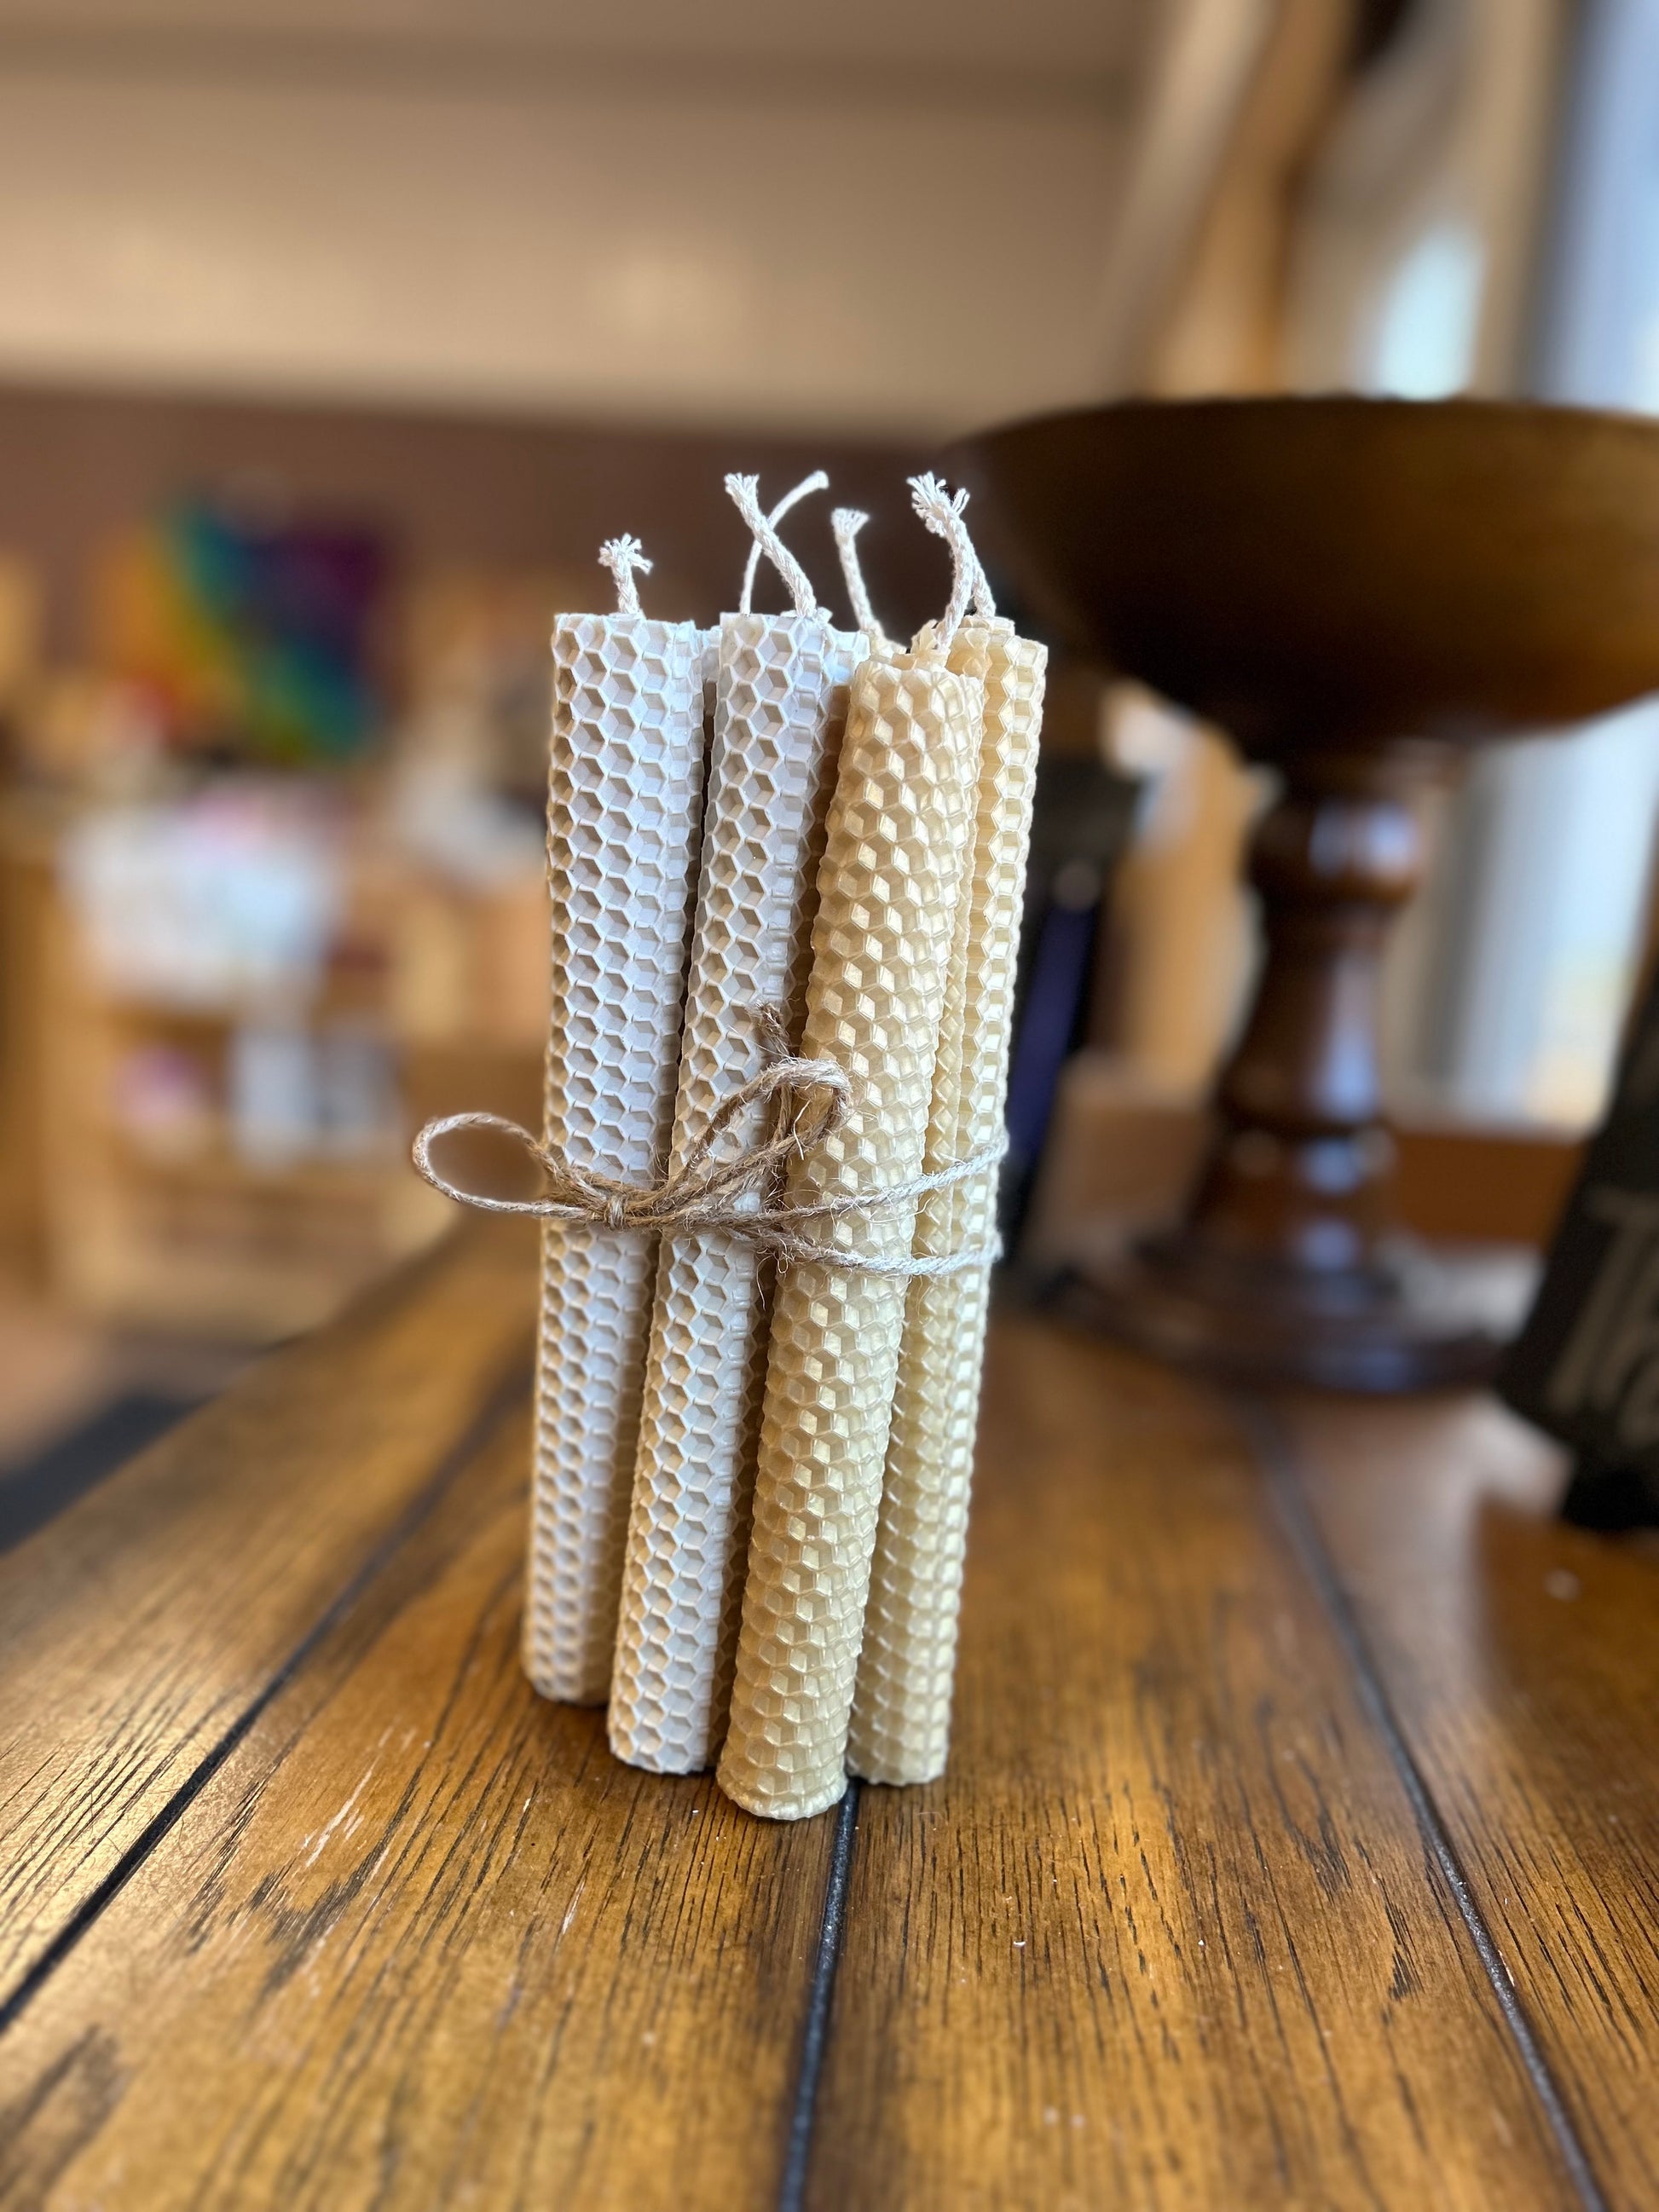 Set of 6 Rolled Beeswax Candles - 20cm Tall - Handcrafted, Eco-Friendly, Natural - Ignite the light / Alberta Laser Engraving